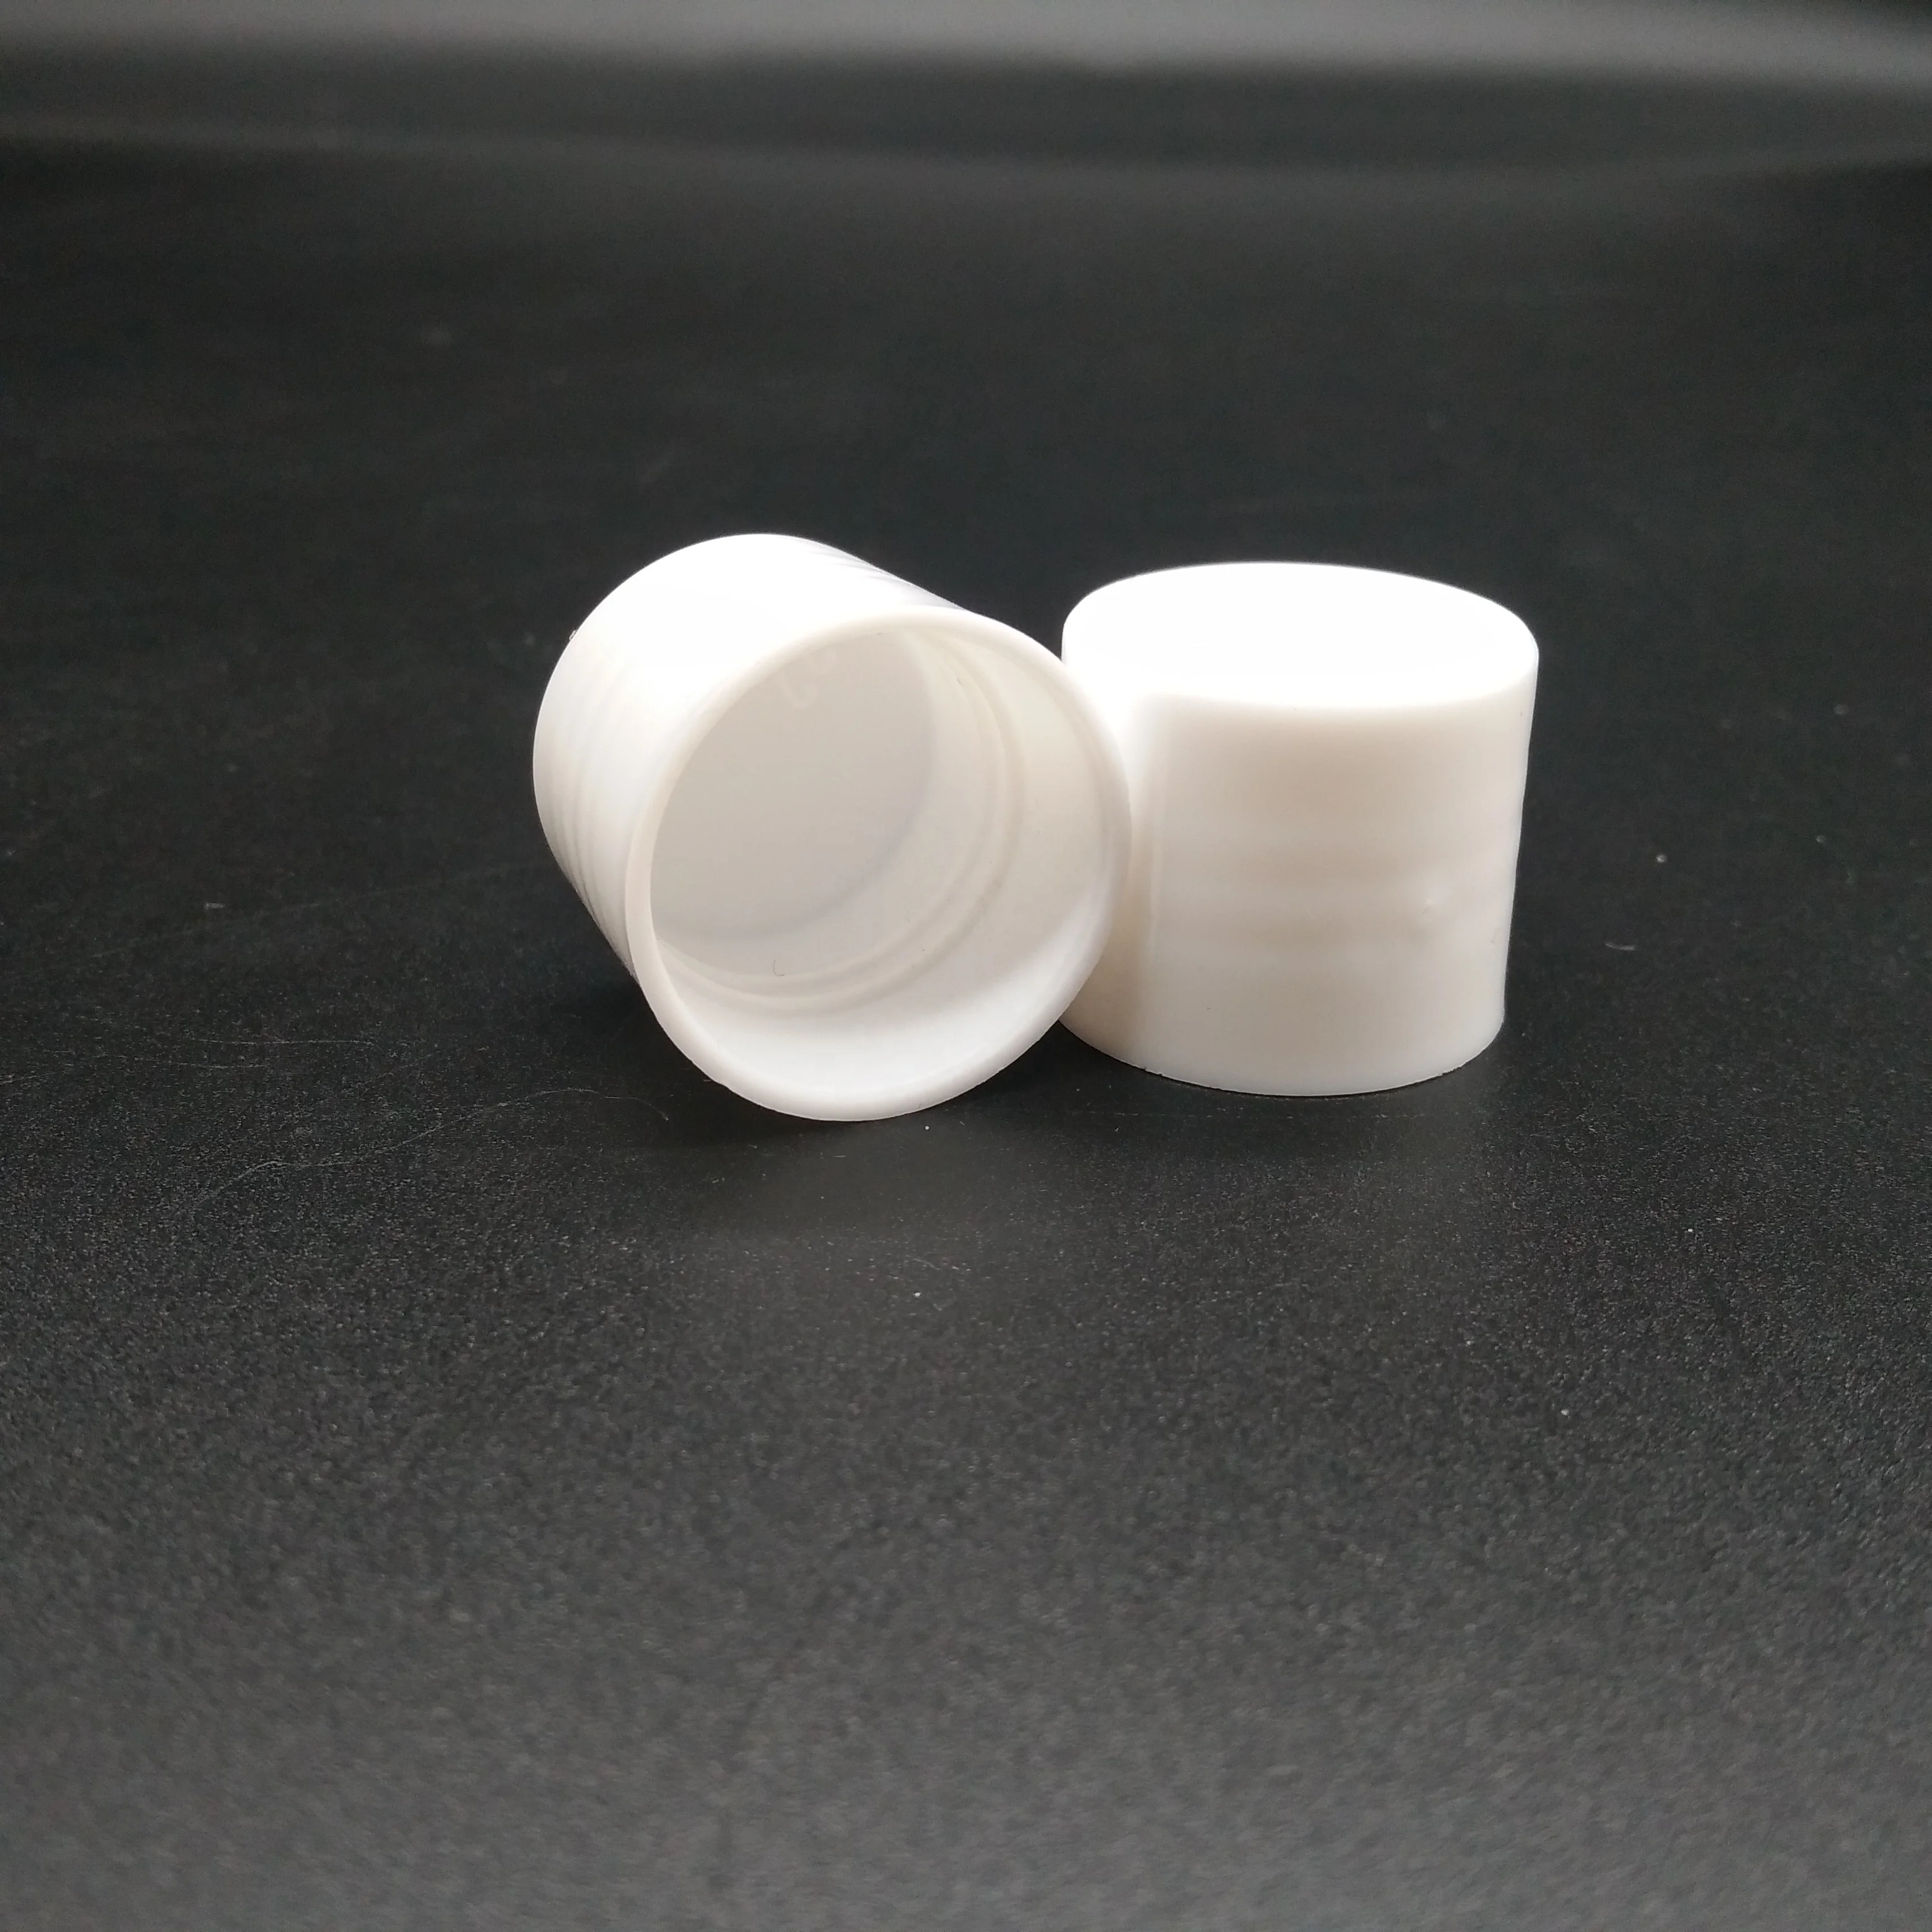 Wholesale customized good quality standard size non spill plastic cap for toothpaste tube (62331897950)